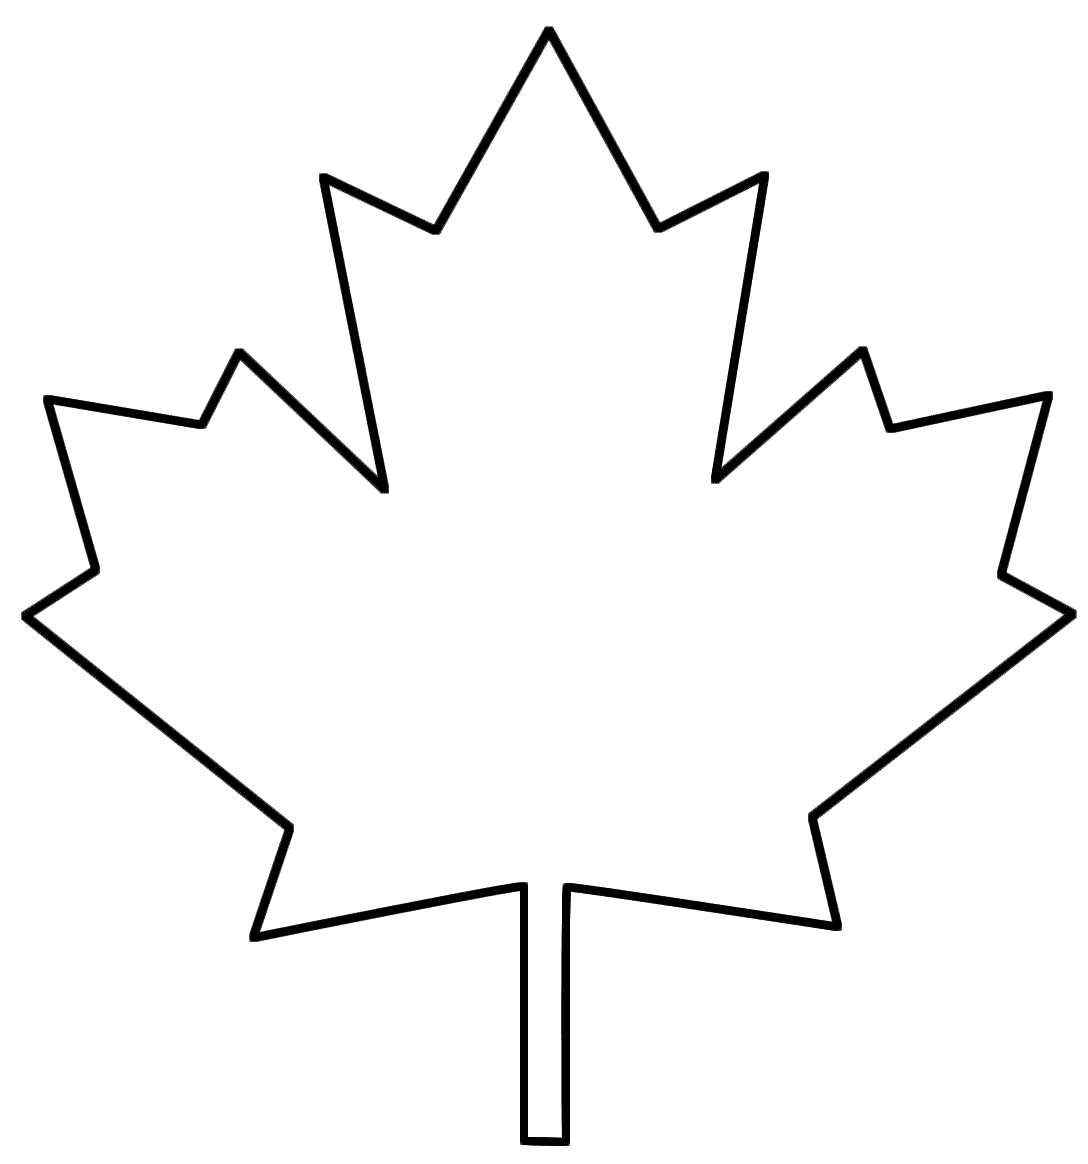 Maple Leaf Clipart Black And White Clipart Panda Free Clipart